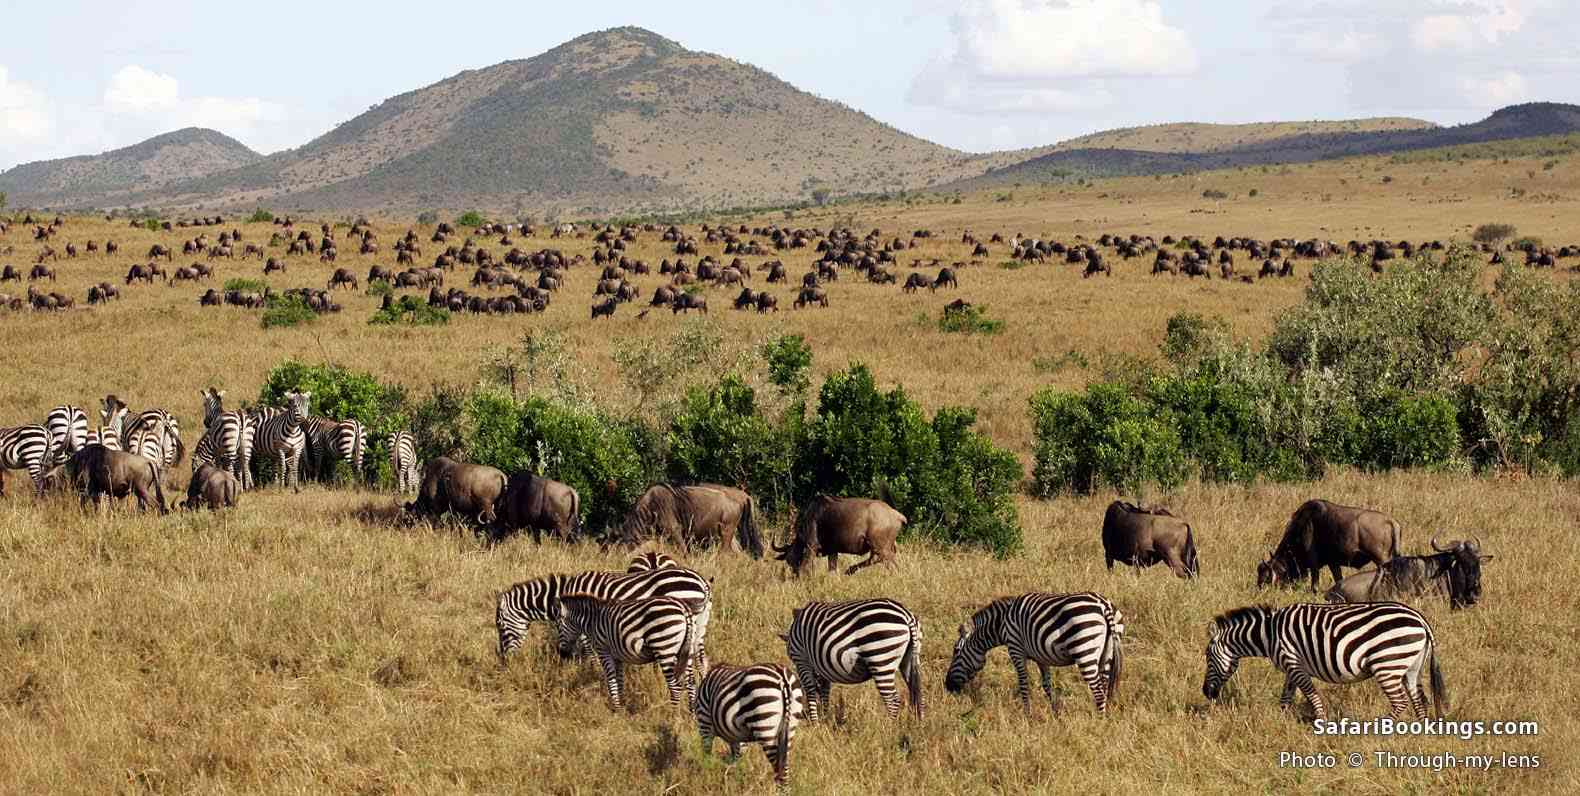 Zebras and wildebeest during the great migration at Masai Mara NR